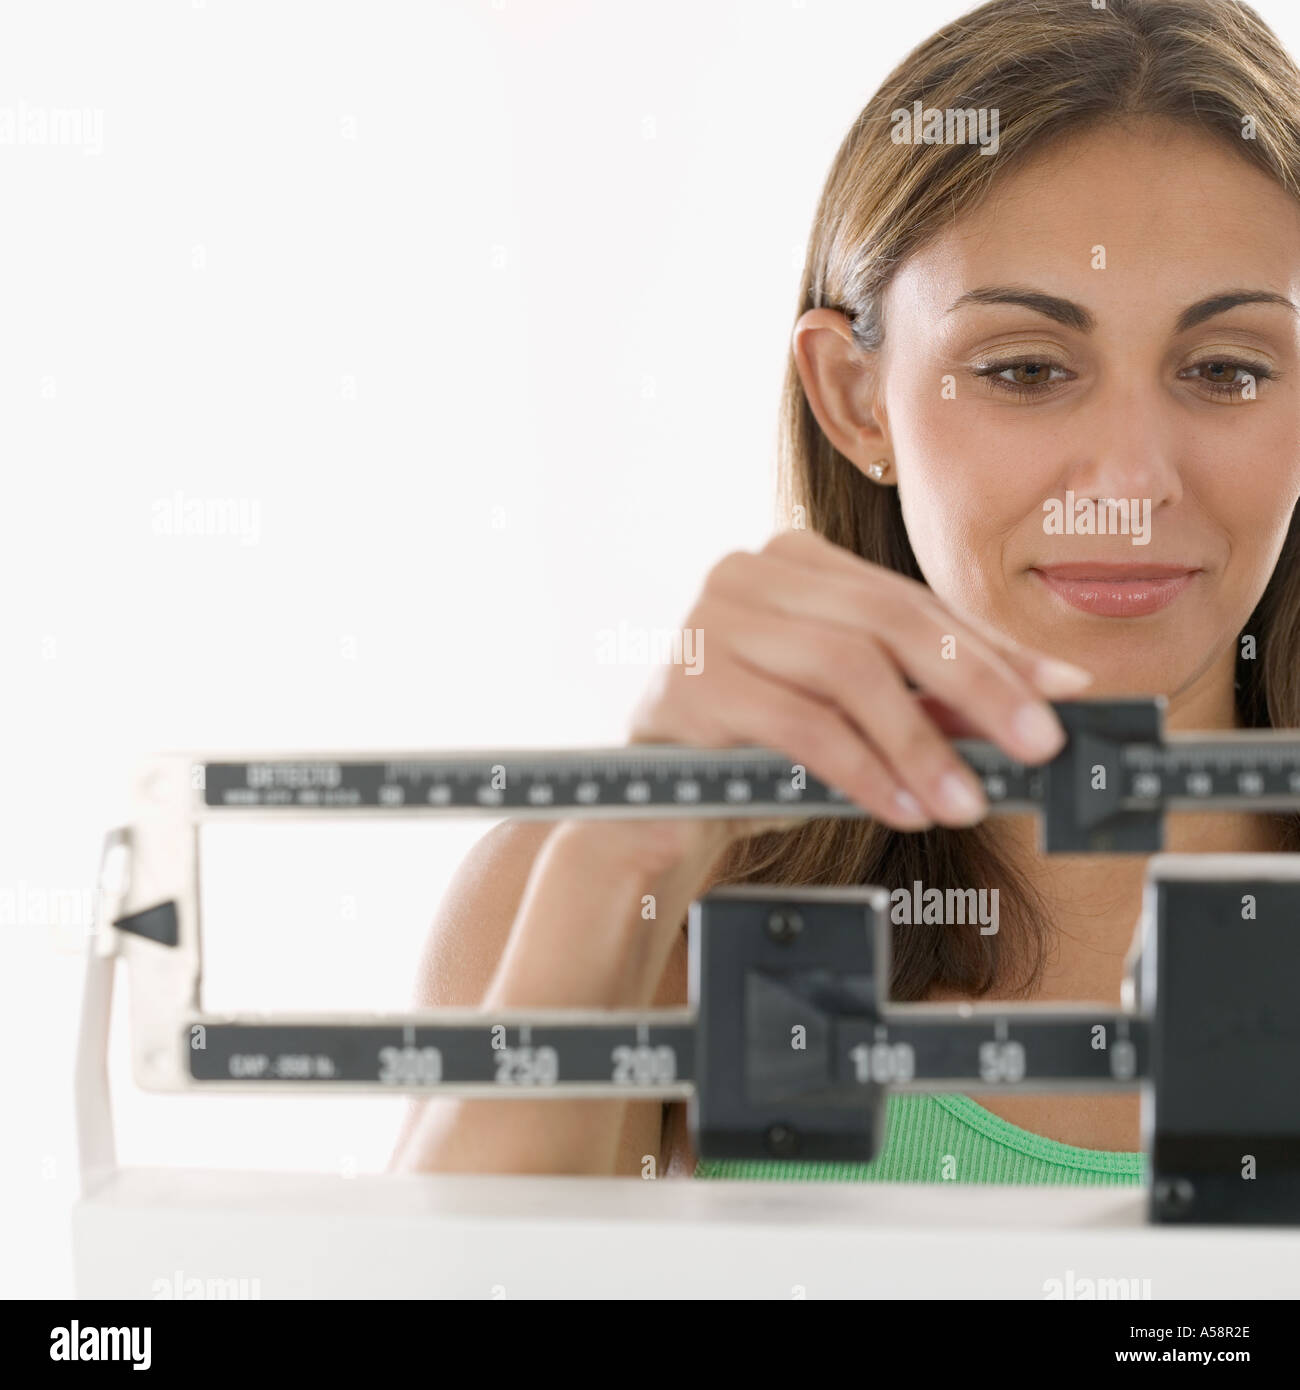 Woman weighing herself on scale Stock Photo